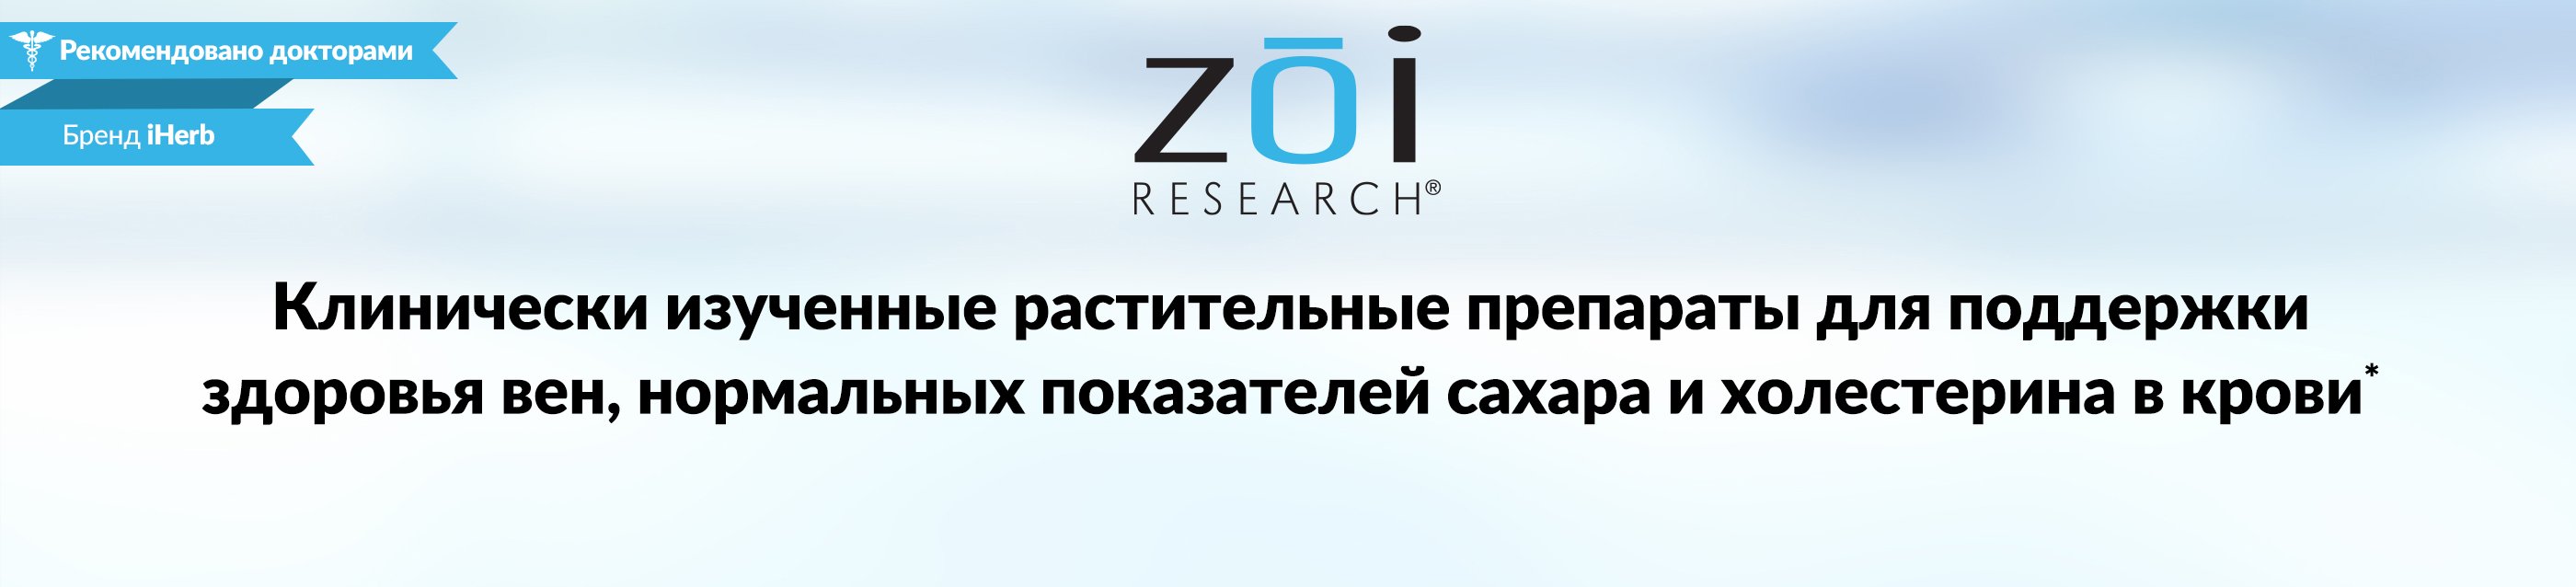 Zoi Research Blood Health